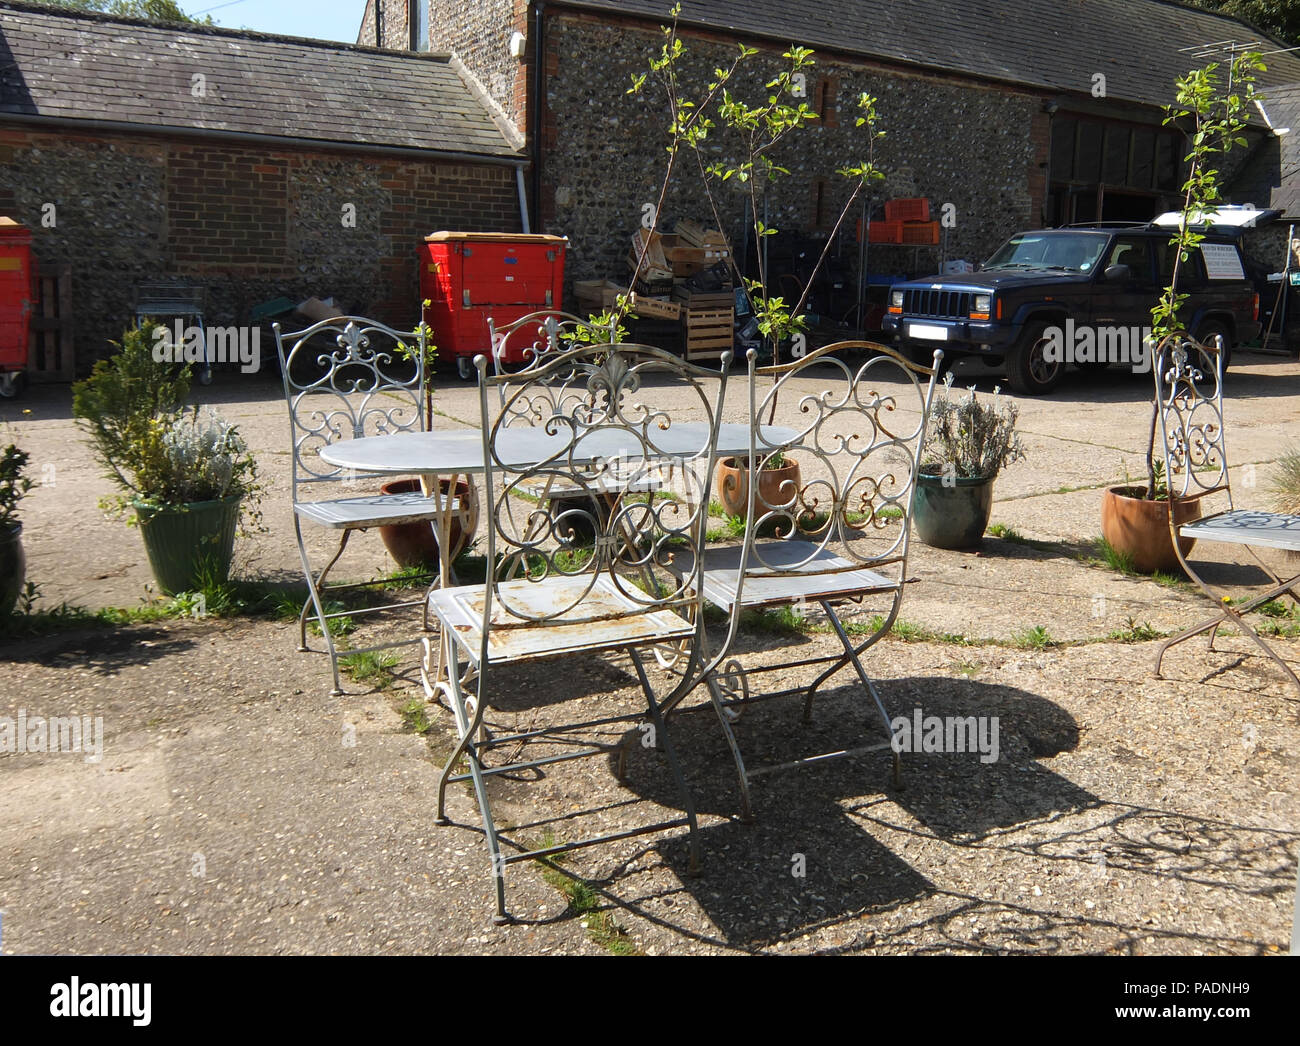 Outdoor seating area for rundown neglected cafe Stock Photo